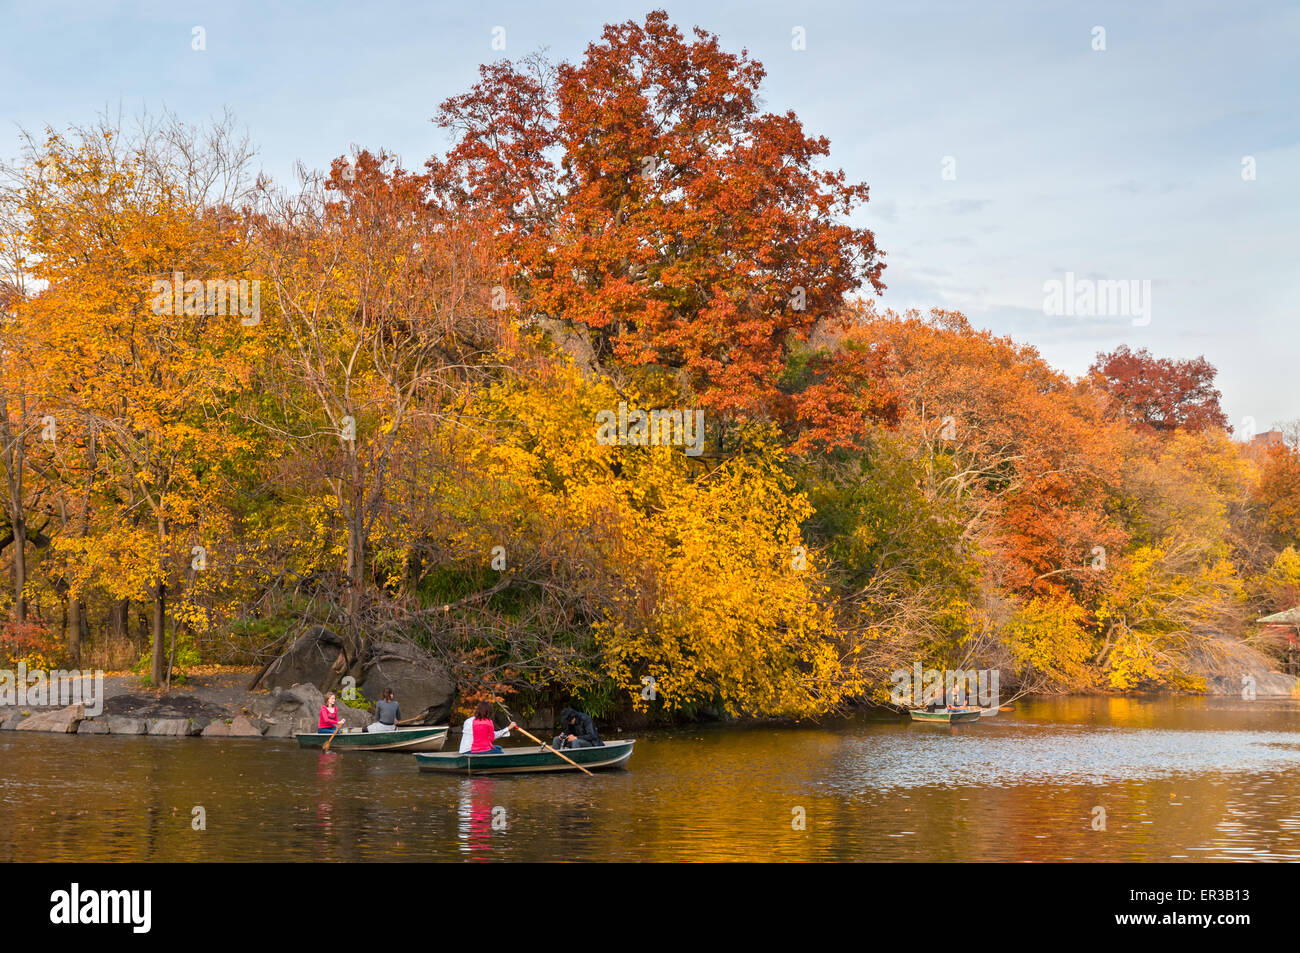 People row in recreational boats on a lake in beautiful autumn Central Park, NYC. Stock Photo